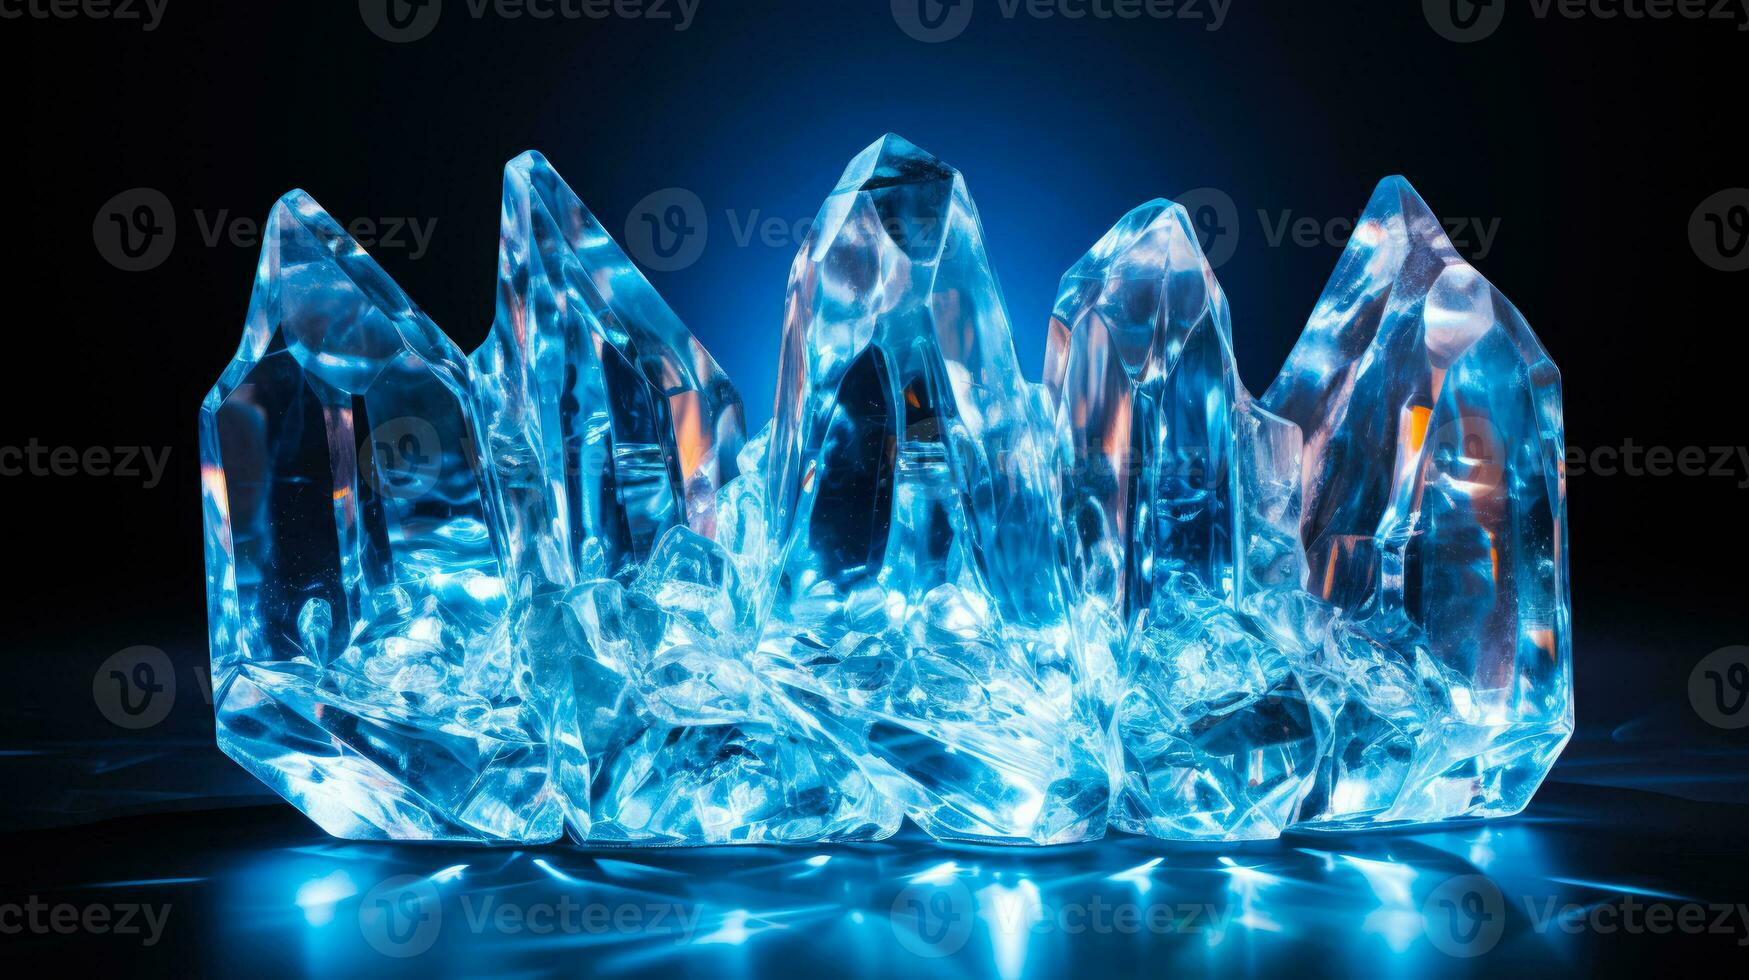 Glowing light illuminating intricate ice sculpture isolated on a gradient background photo